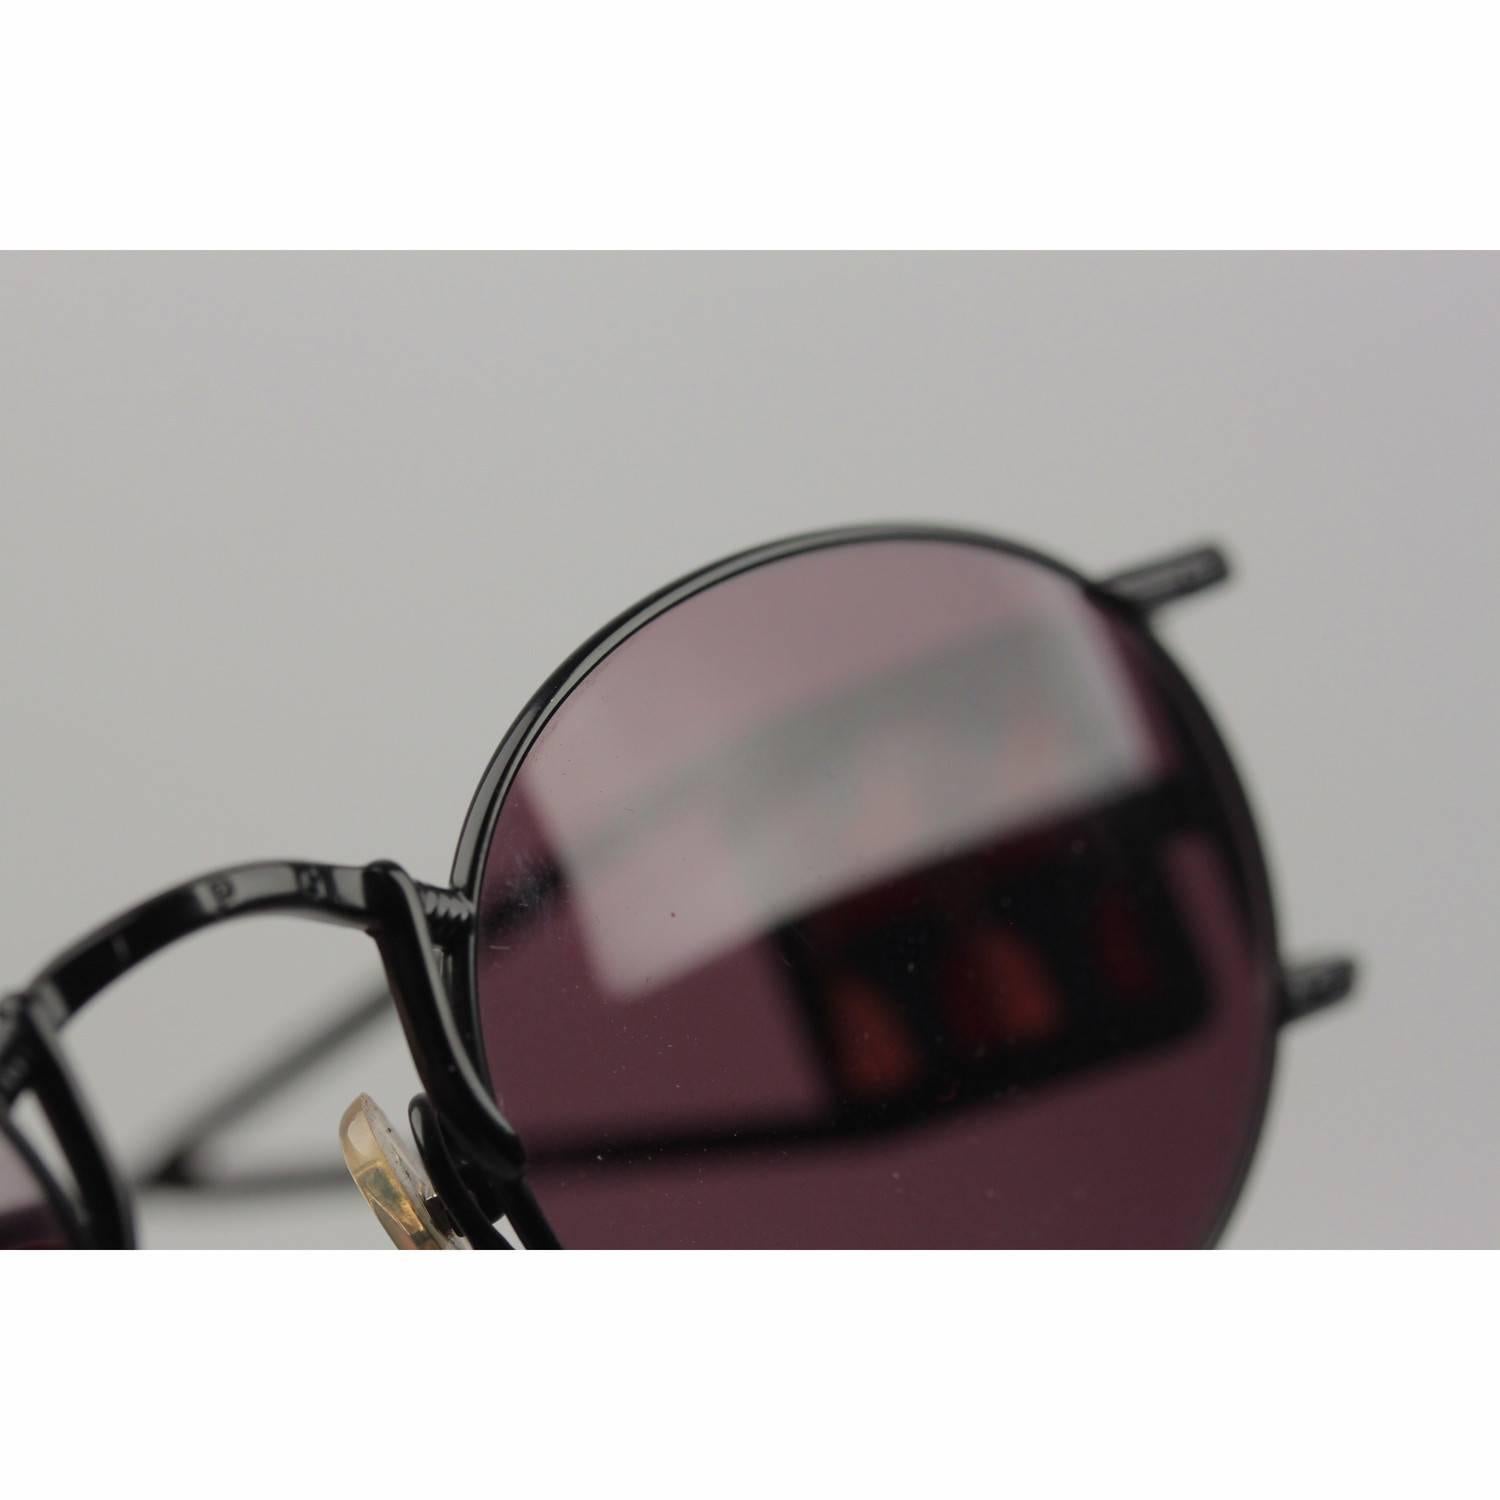 JEAN PAUL GAULTIER Vintage Sunglasses Mosaic 56-4672 New Old Stock 3